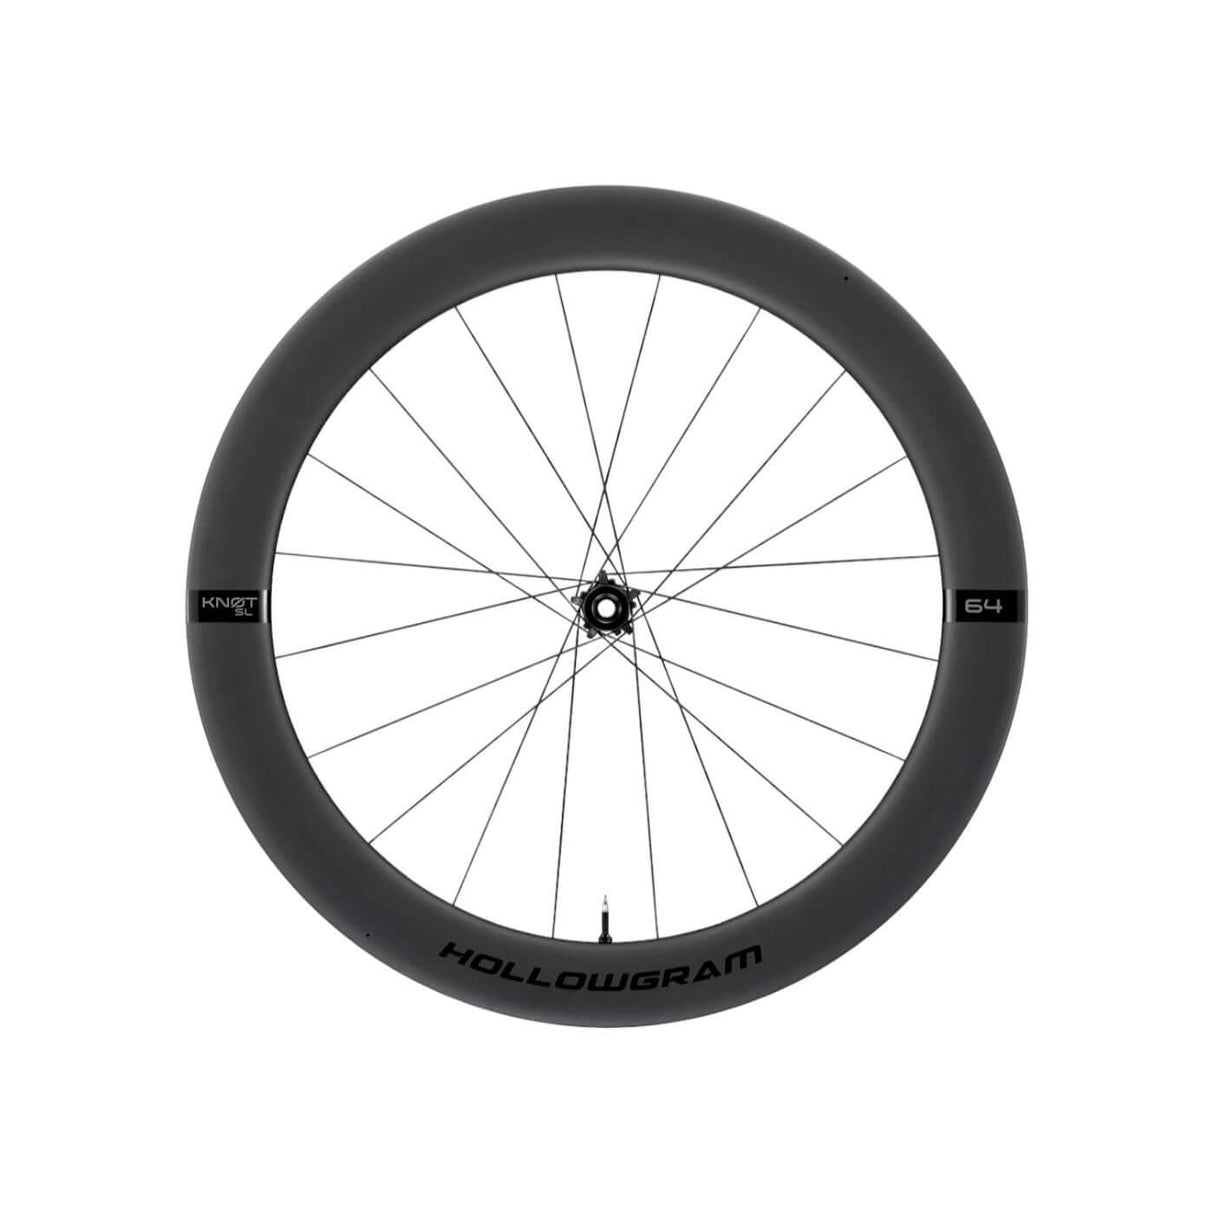 Hollowgram 64 SL KNØT Front Wheel 100x12 | Strictly Bicycles